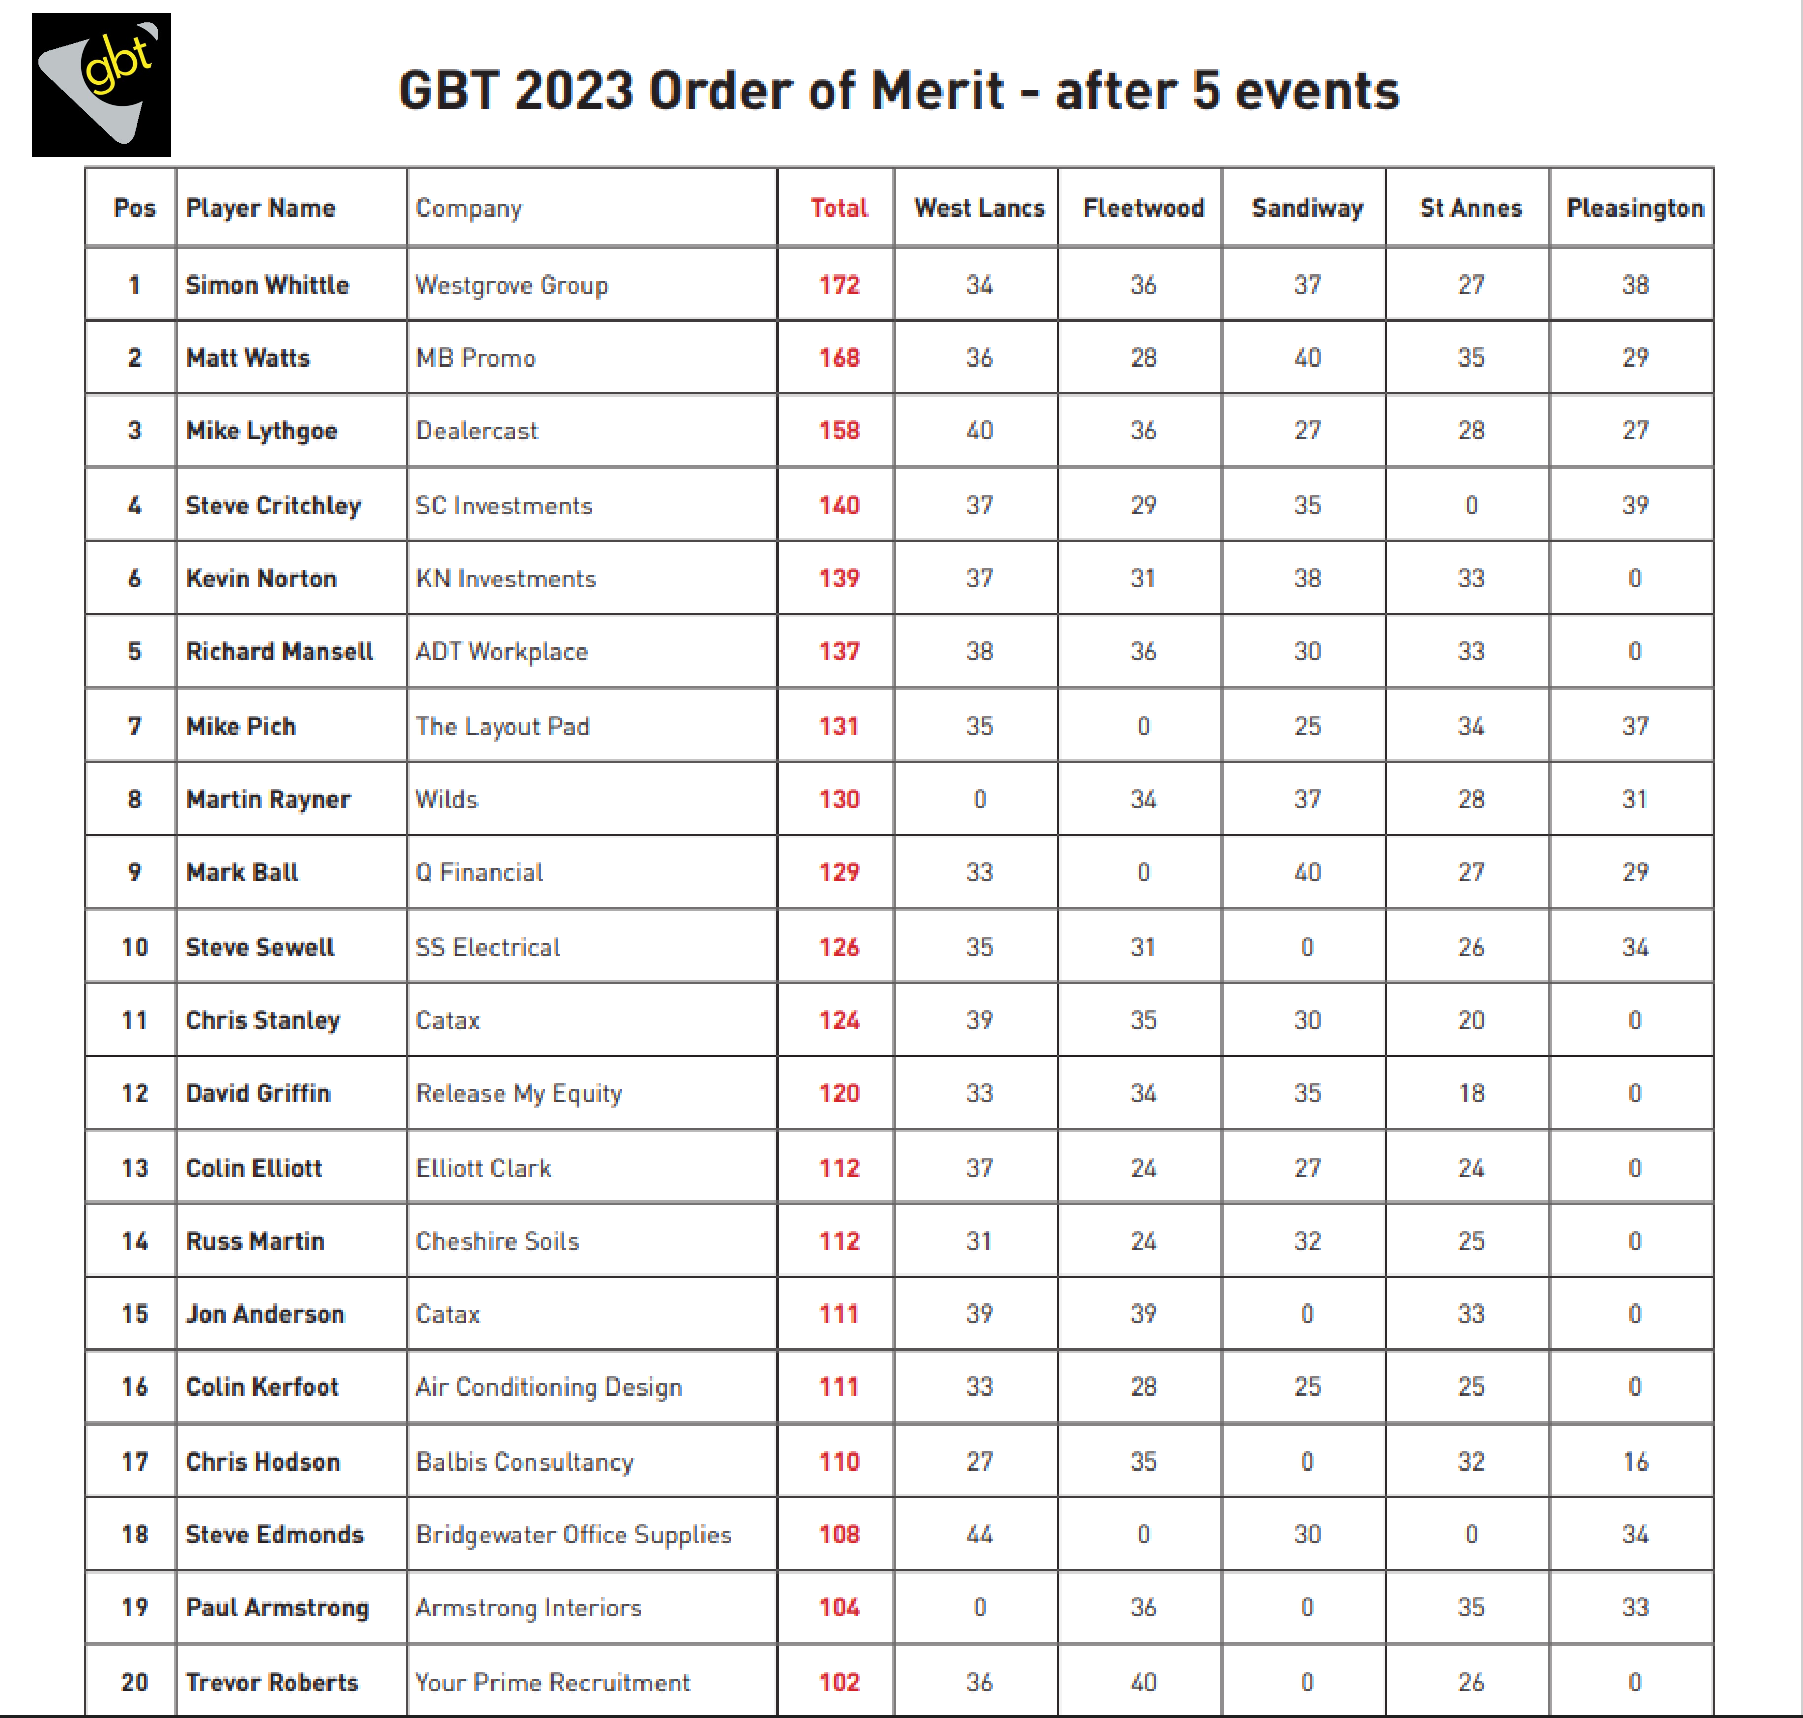 GBT2023_OOM_5 Events